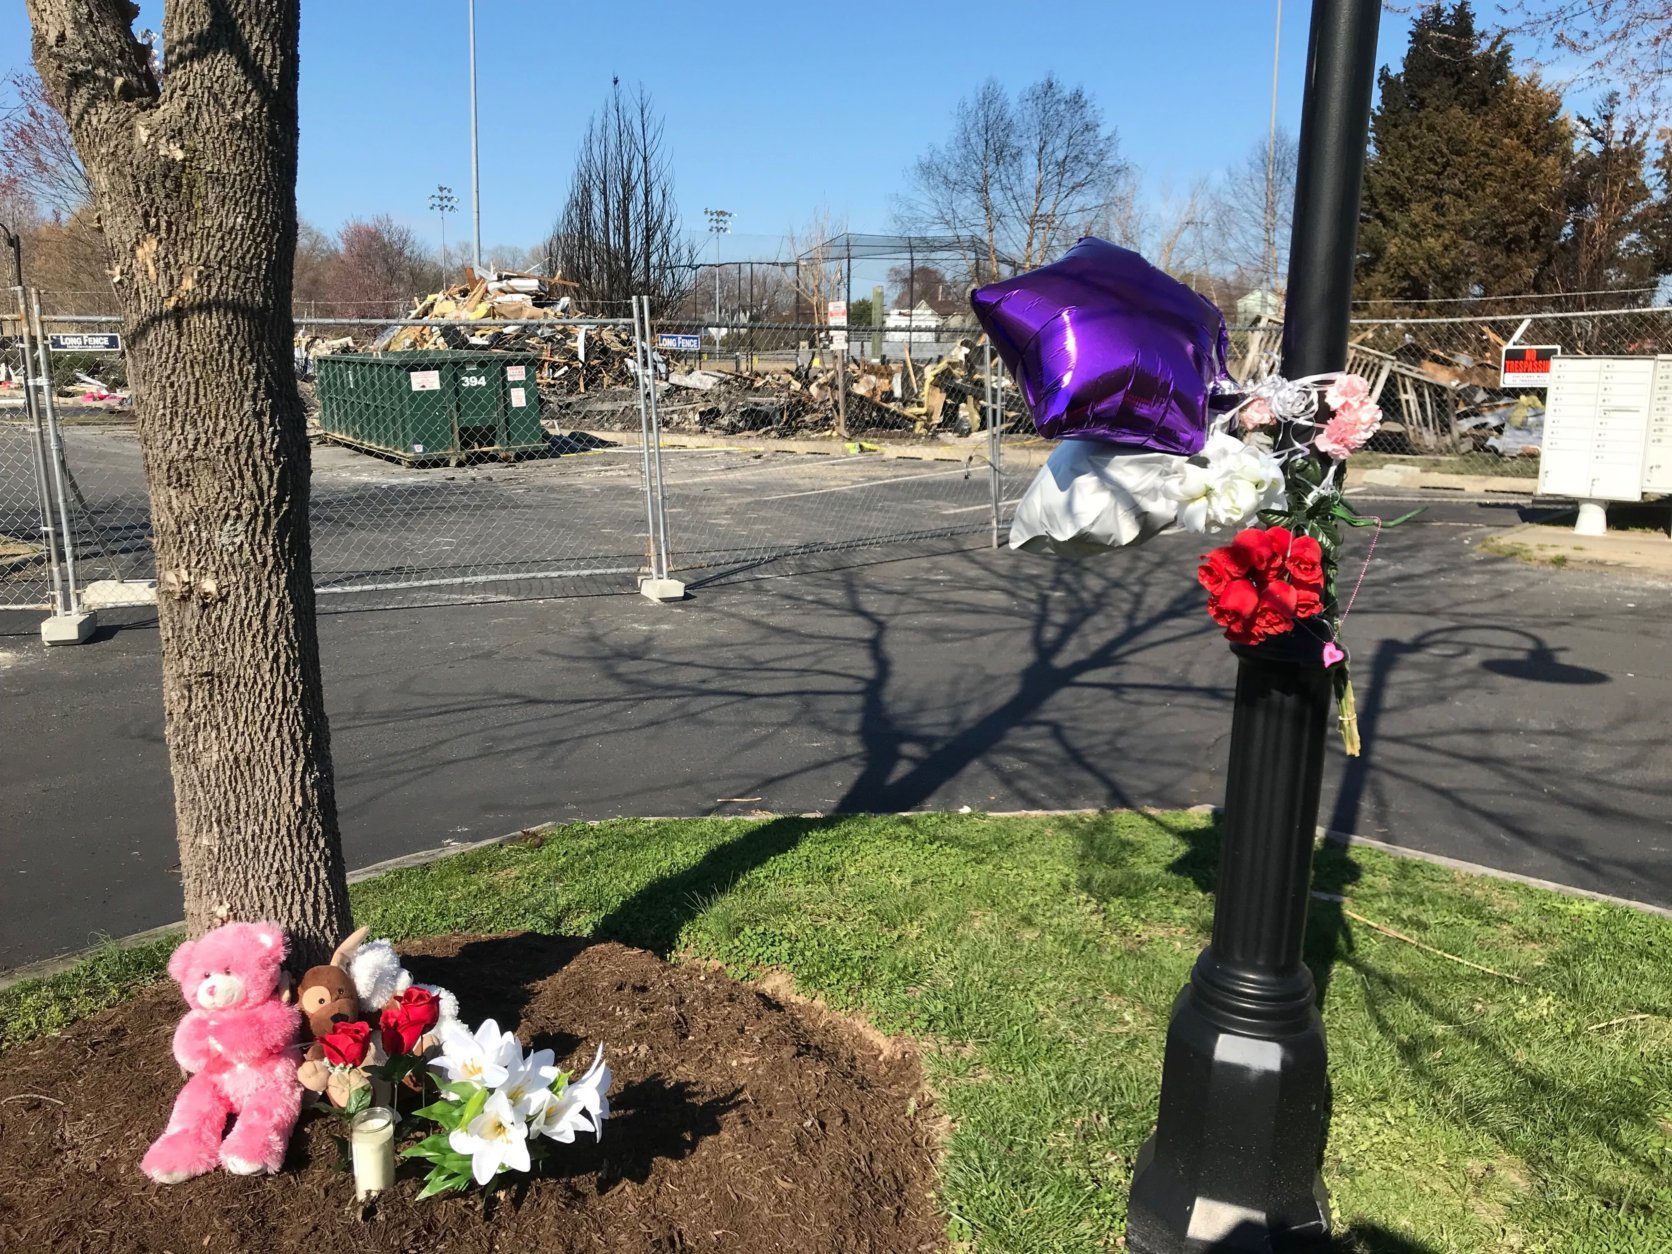 The small town of Chesapeake Beach, Maryland, gathered Saturday, April 6, 2019, to celebrate the town's anniversary and to mourn two people who were killed in a fire. (WTOP/Dick Uliano)